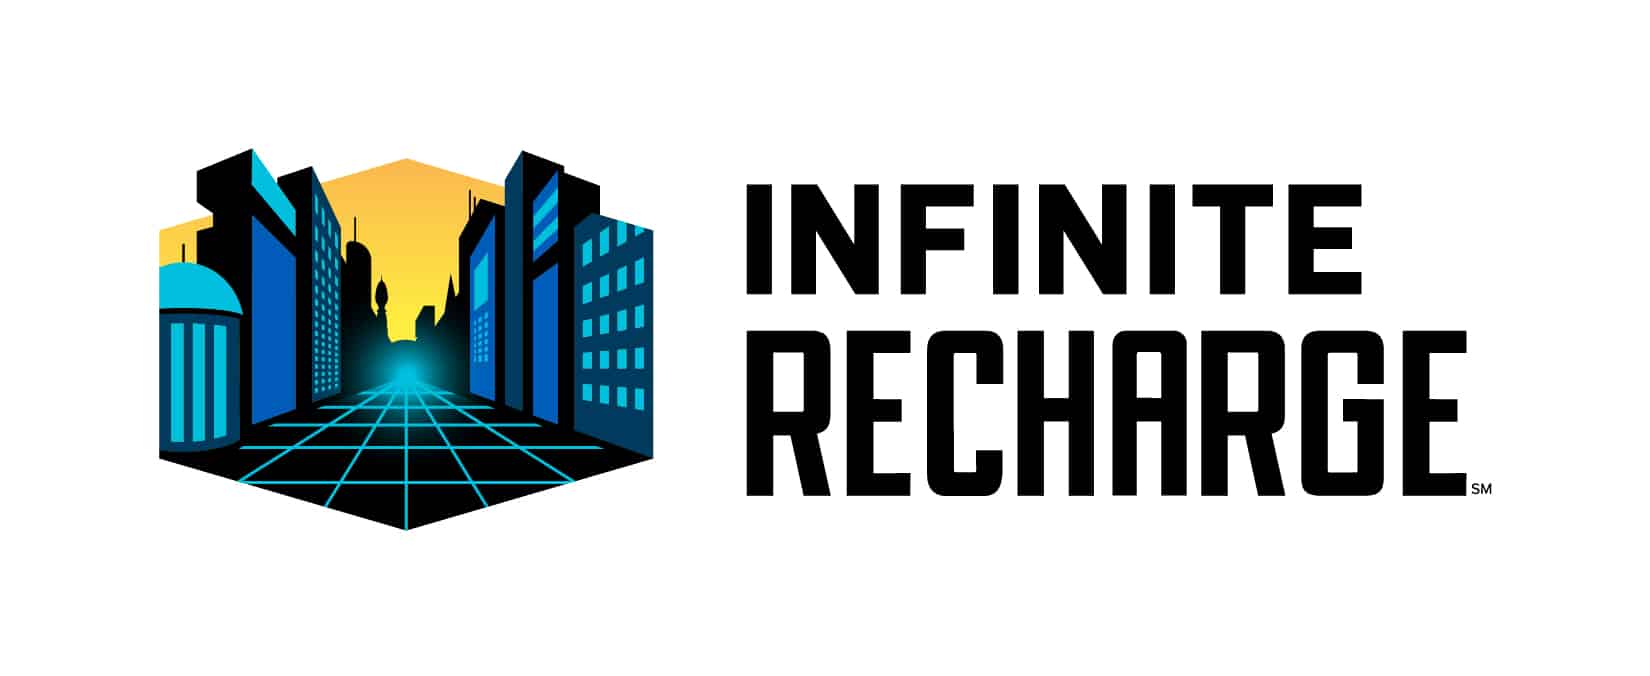 Image result for infinite recharge logo